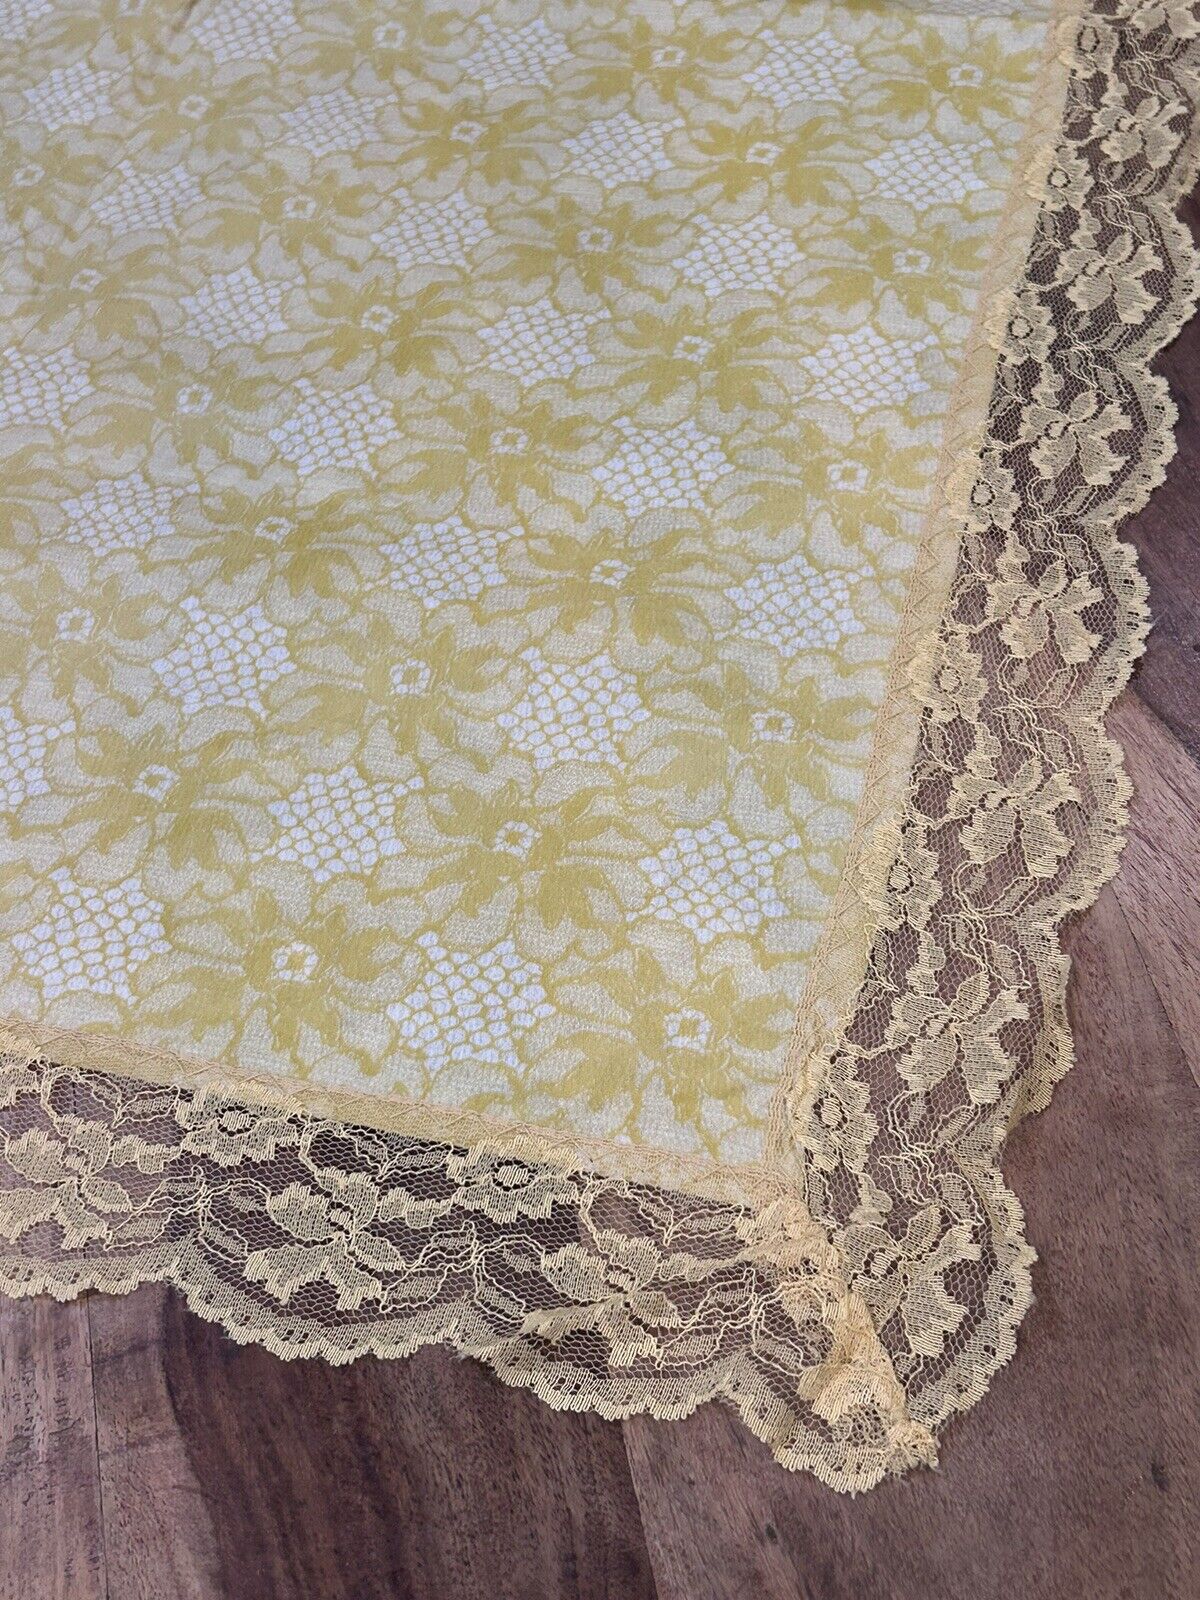 Vintage Yellow Flower And Lace Vinyl Tablecloth. 68” X 50”.